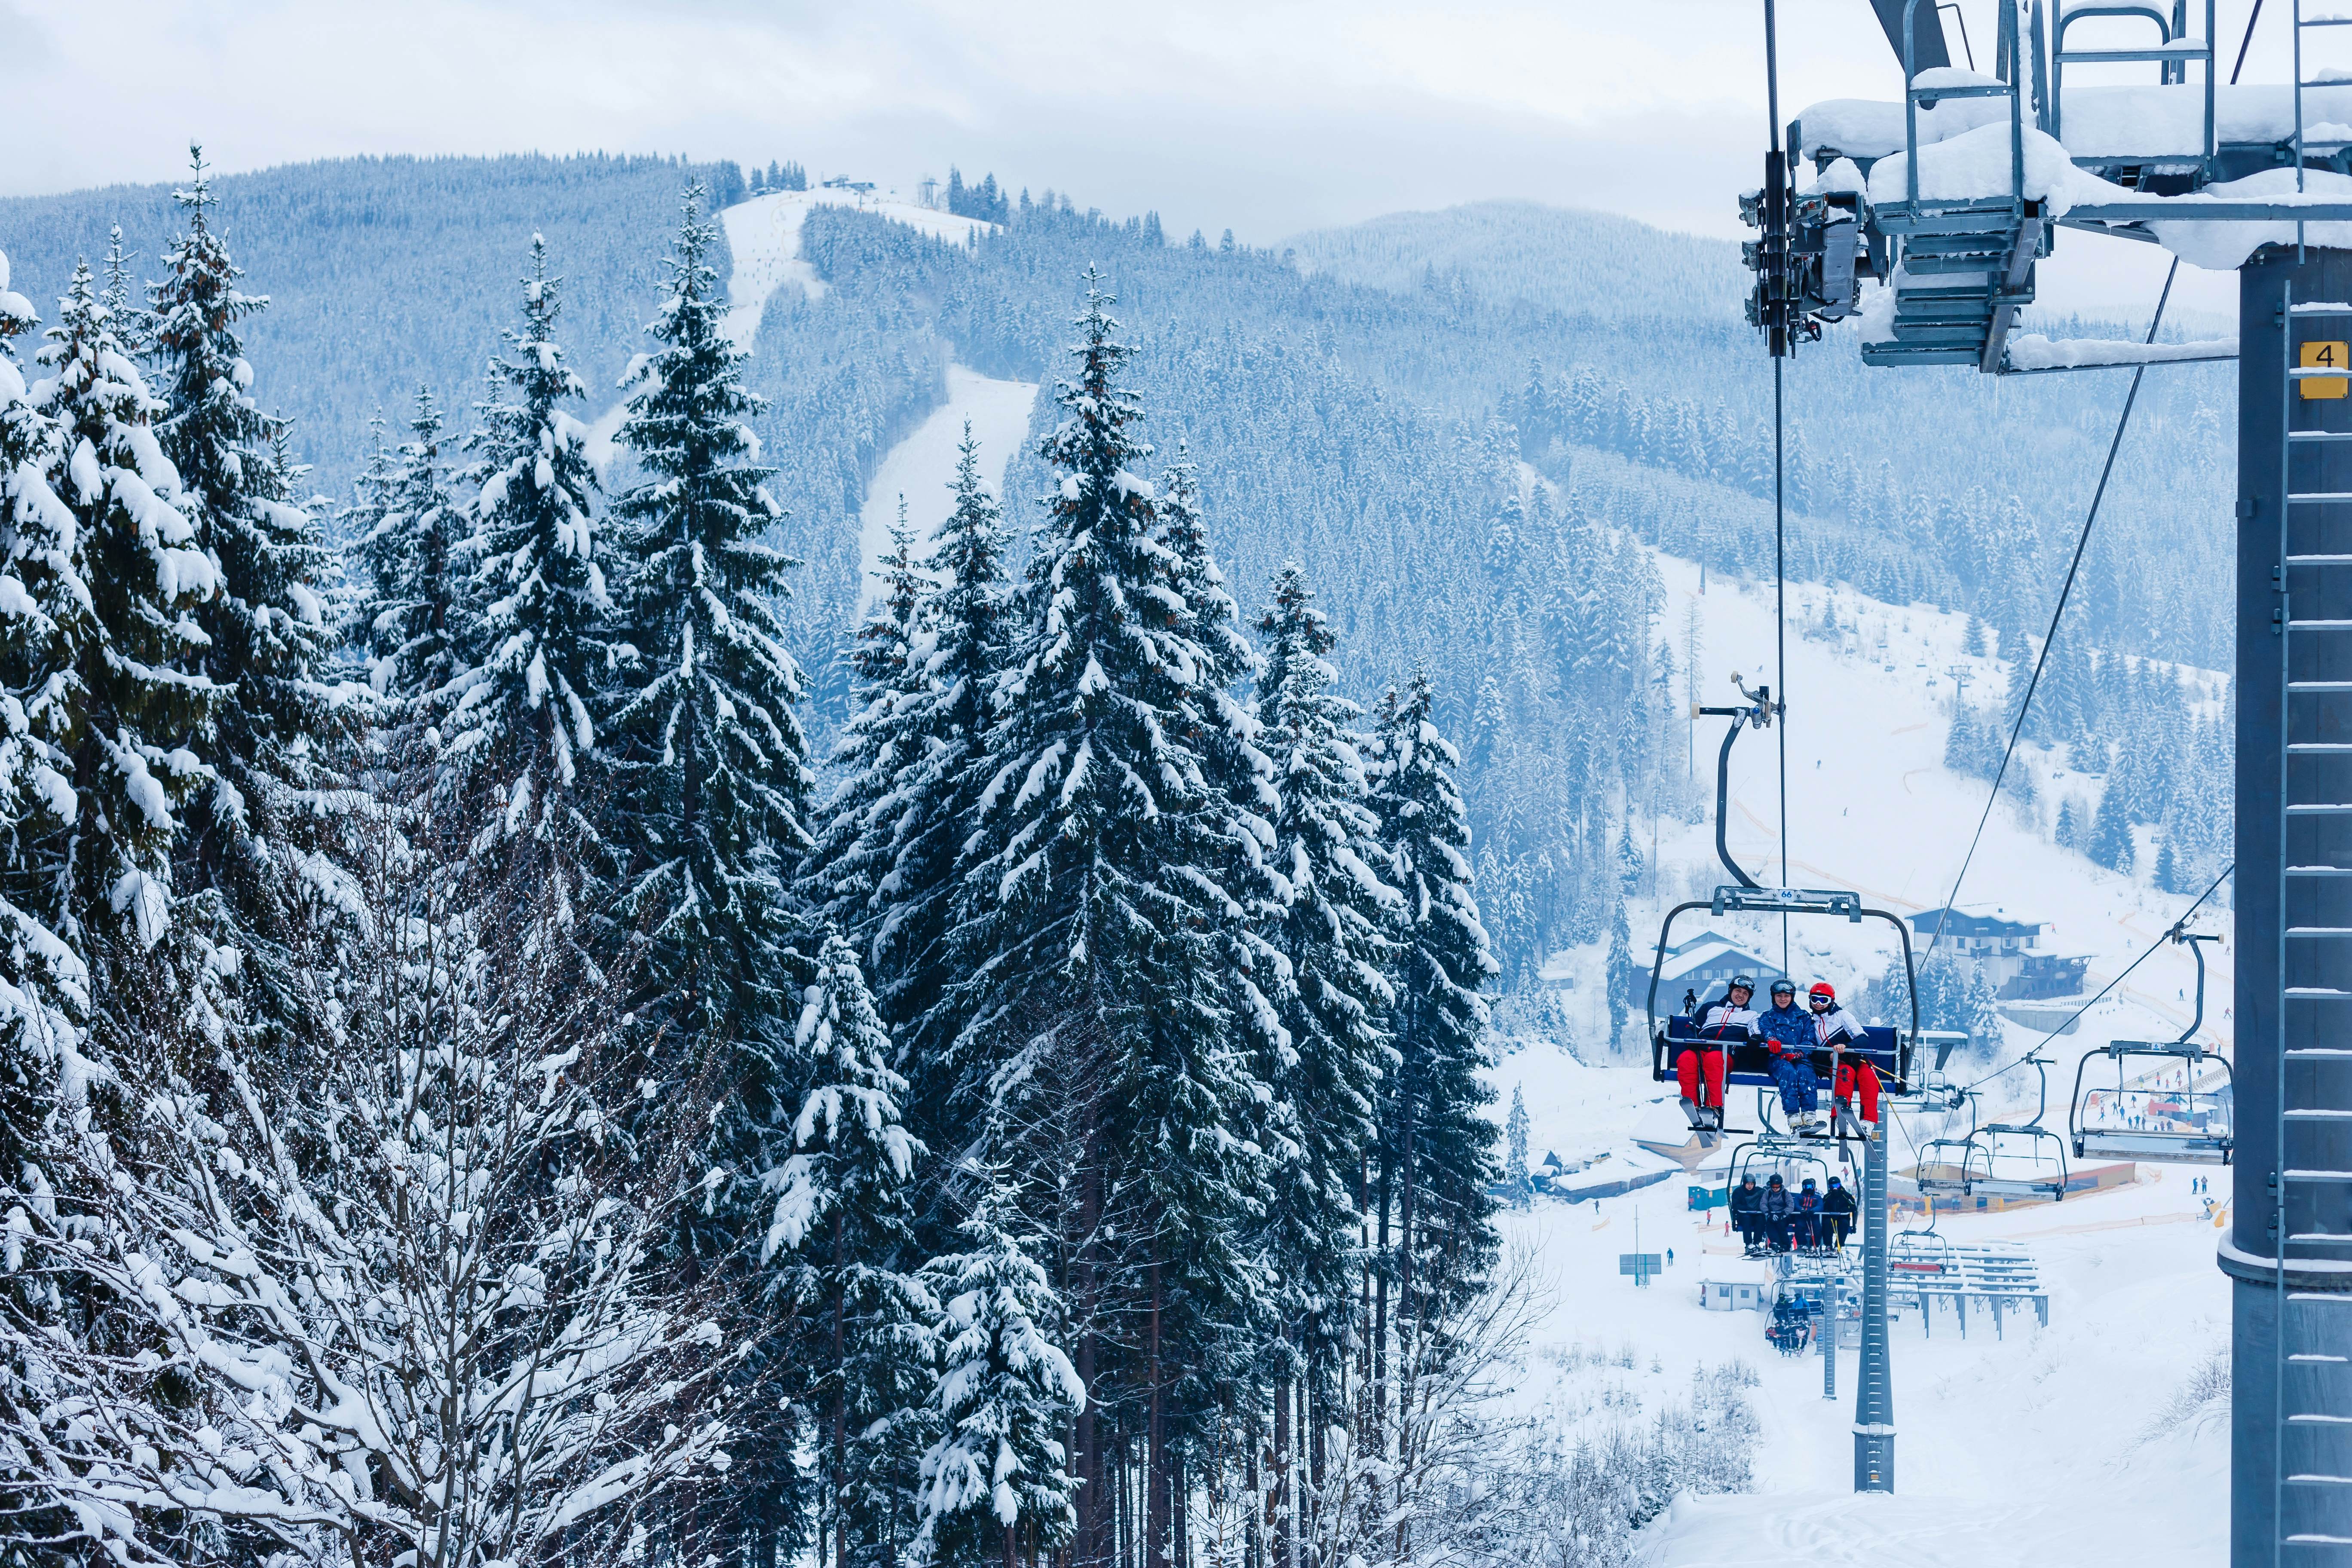 Cheap places to ski in Europe this winter - Lonely Planet